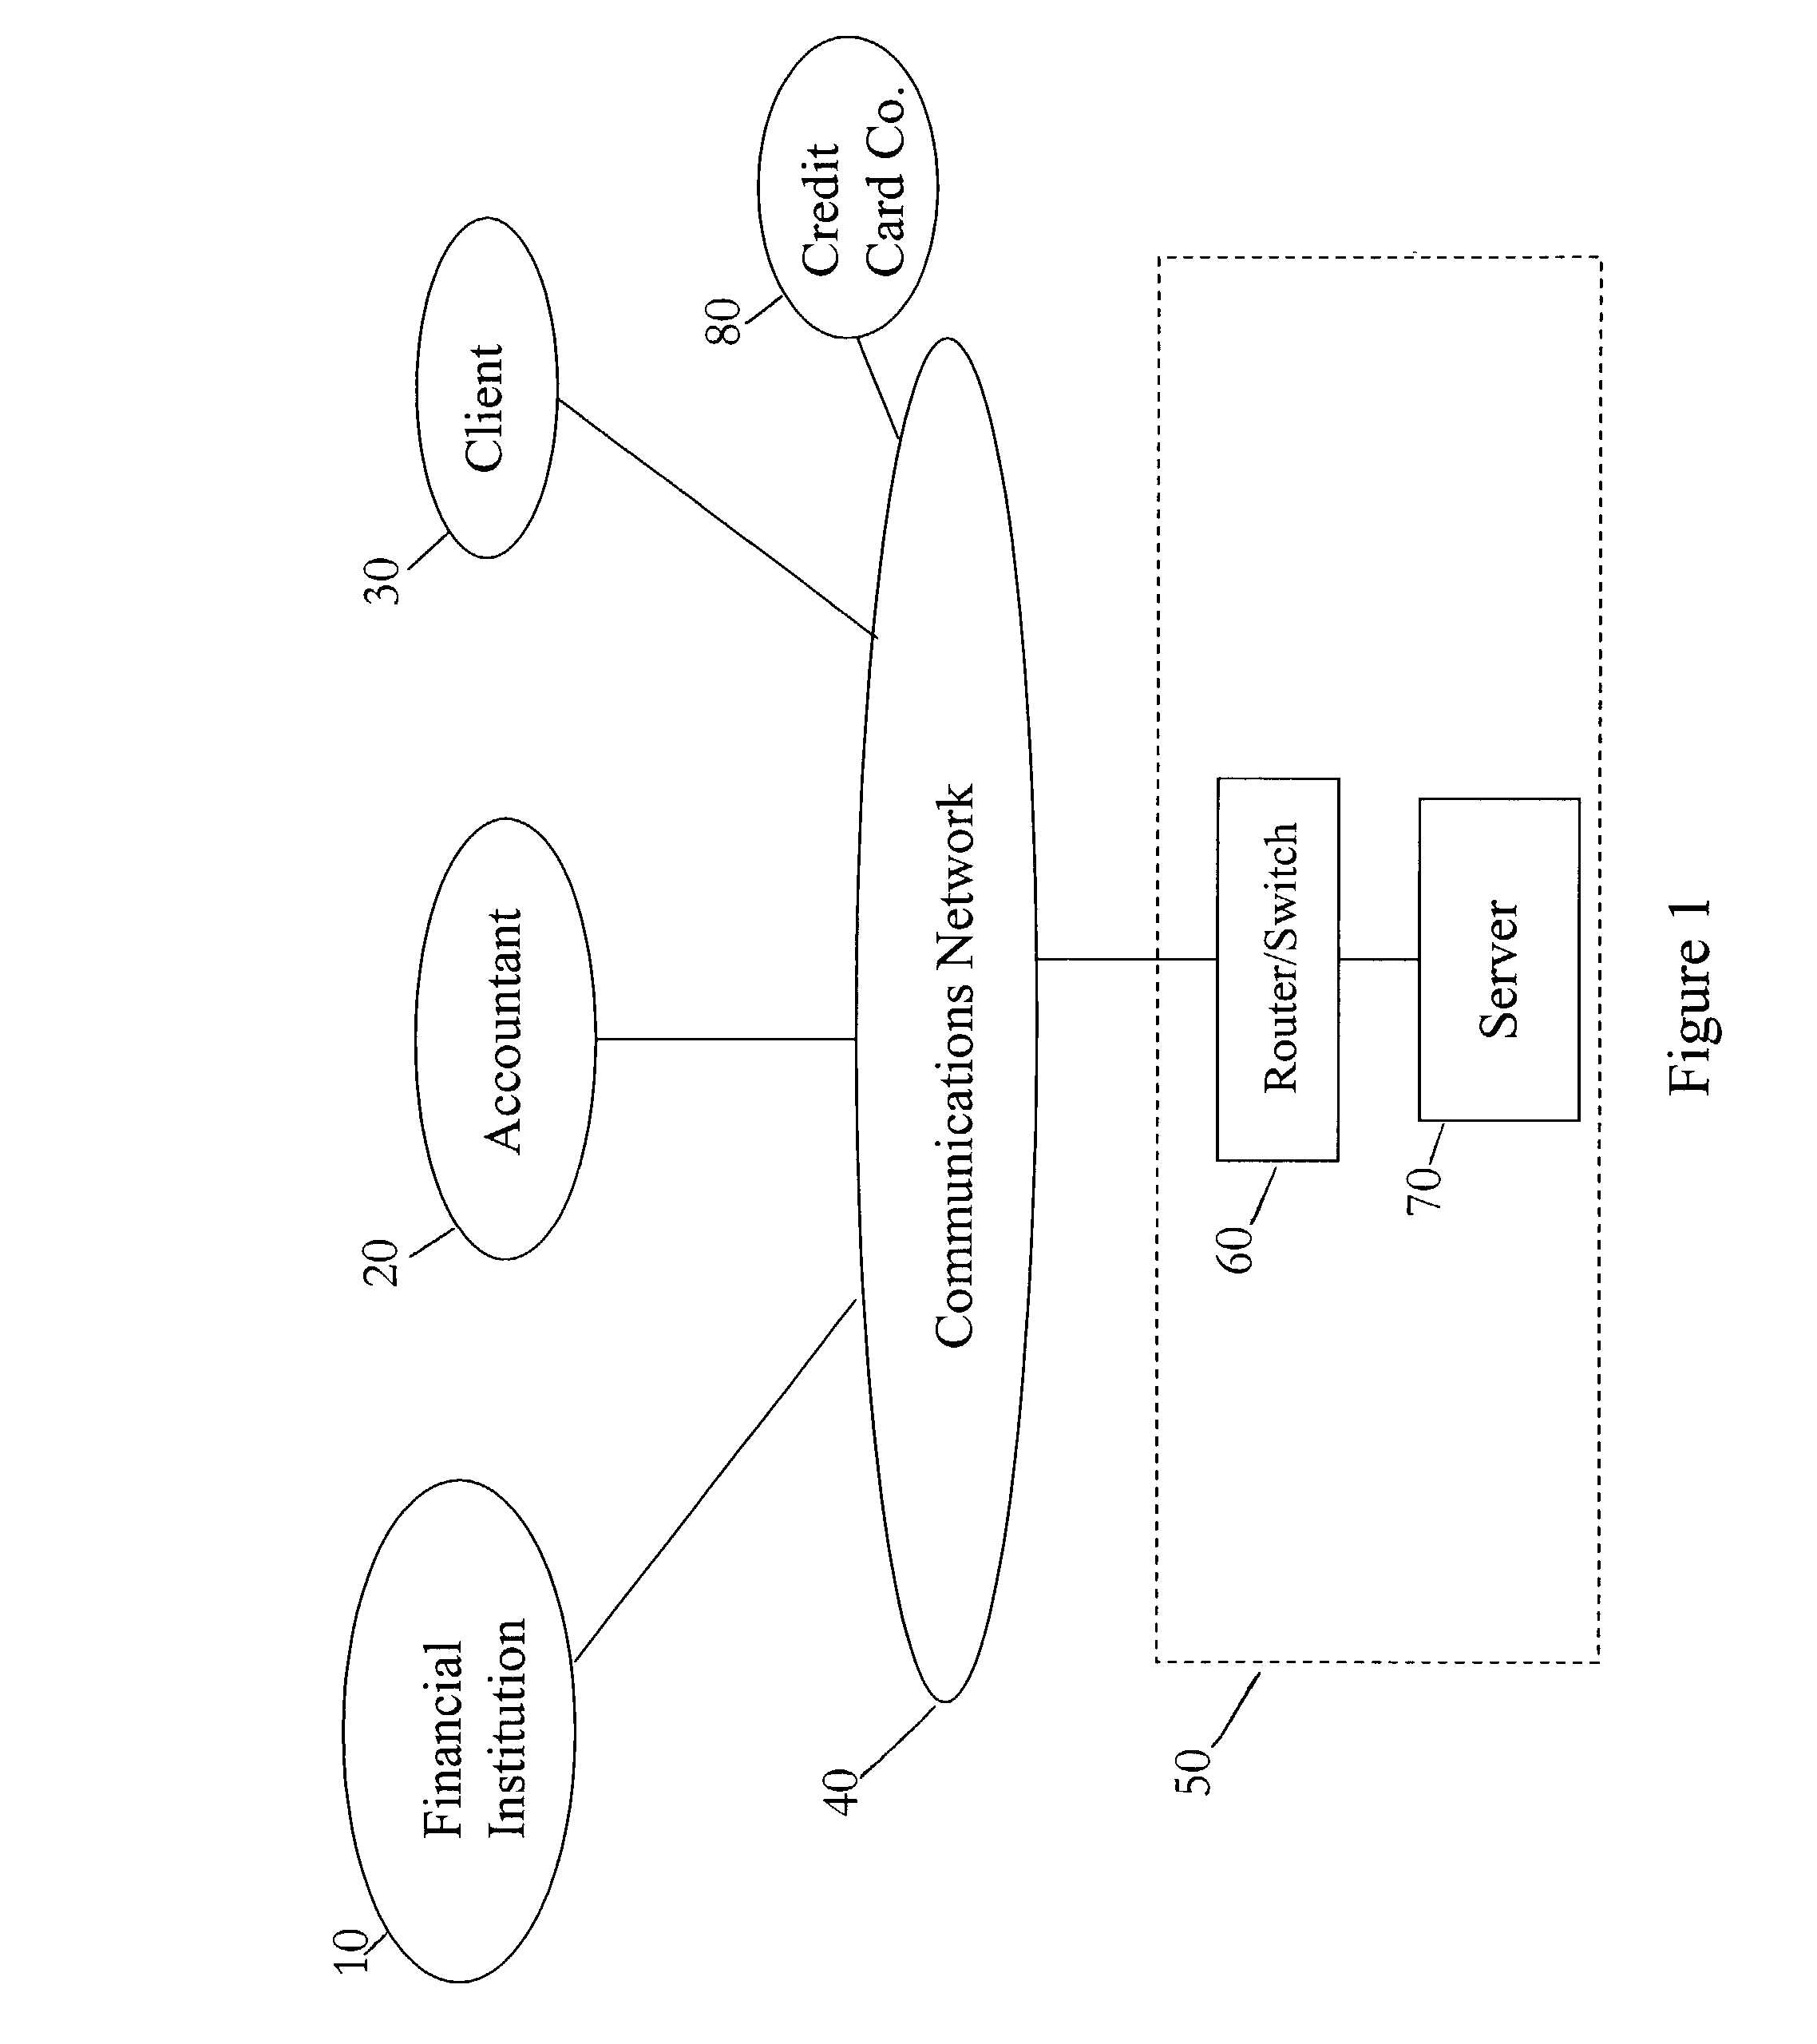 Systems, methods and computer program products facilitating automated confirmations and third-party verifications